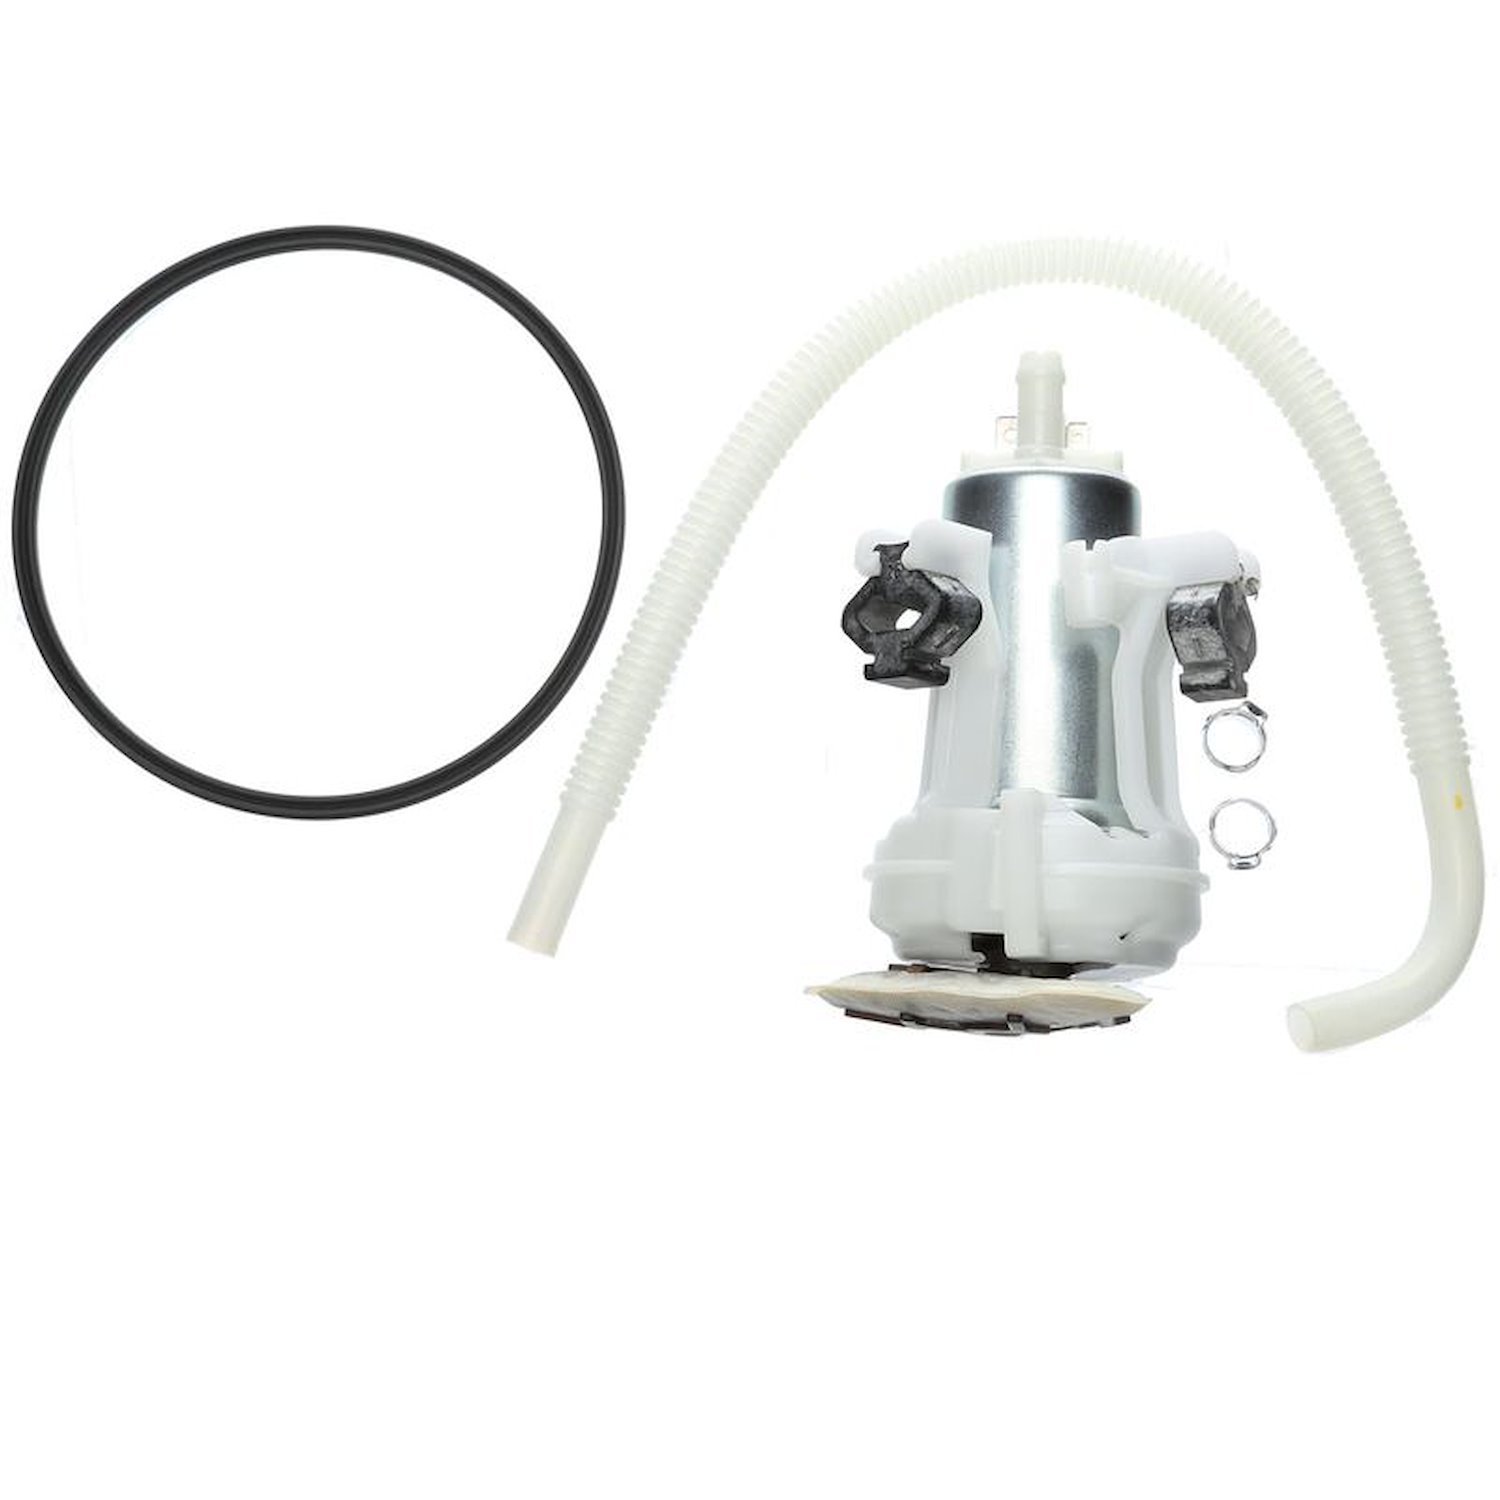 OE Replacement Electric Fuel Pump and Strainer Set for 2002-2005 BMW 745/2006-2008 BMW 750